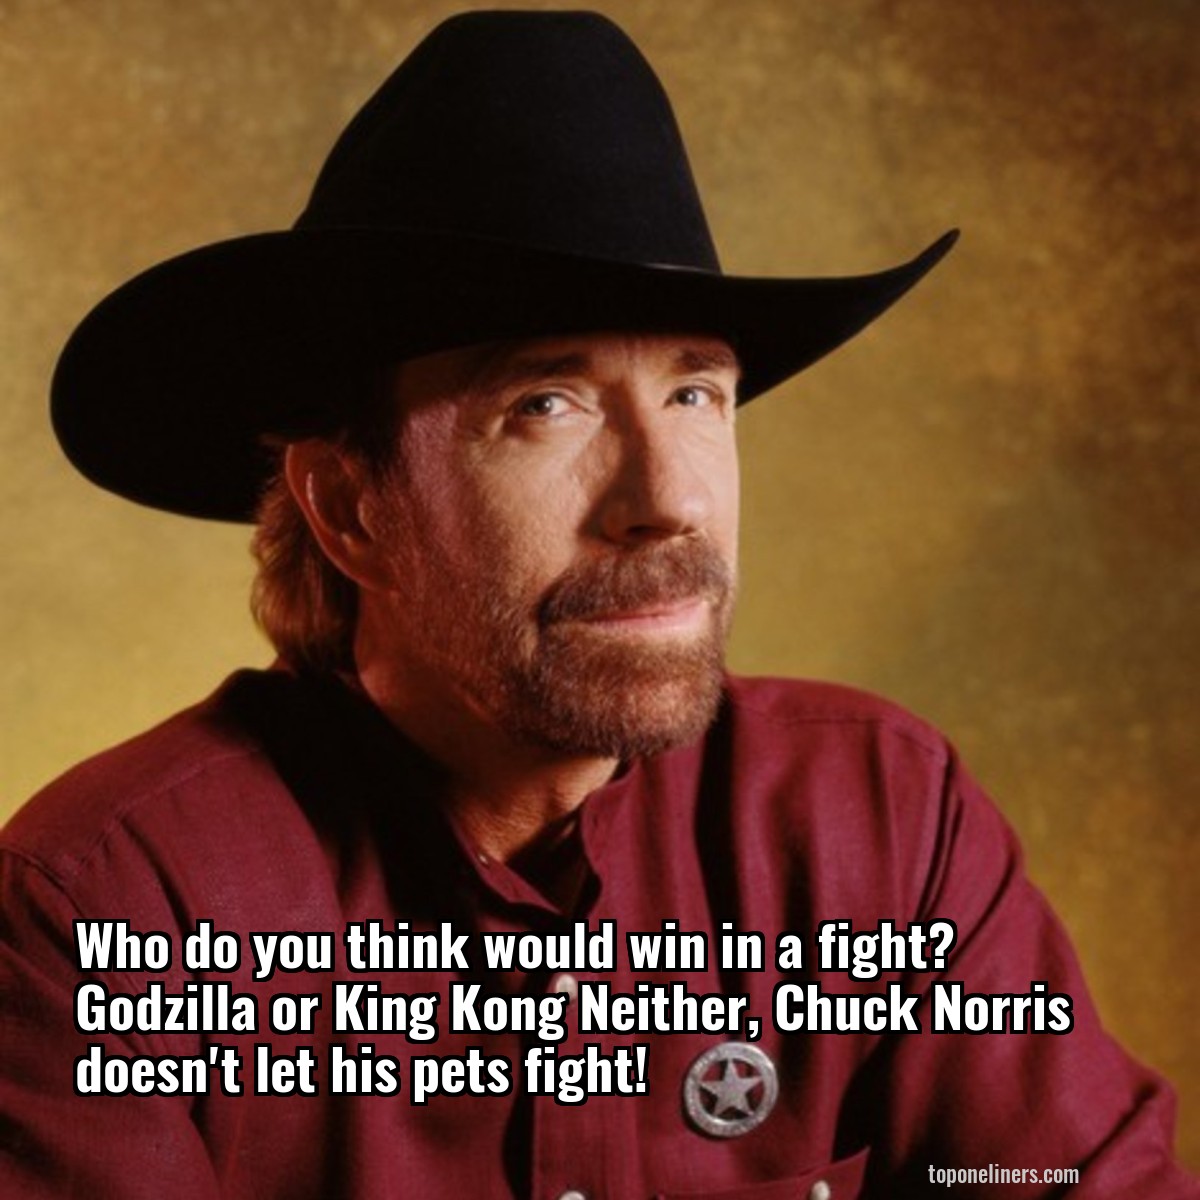 Who do you think would win in a fight? Godzilla or King Kong Neither, Chuck Norris doesn't let his pets fight!